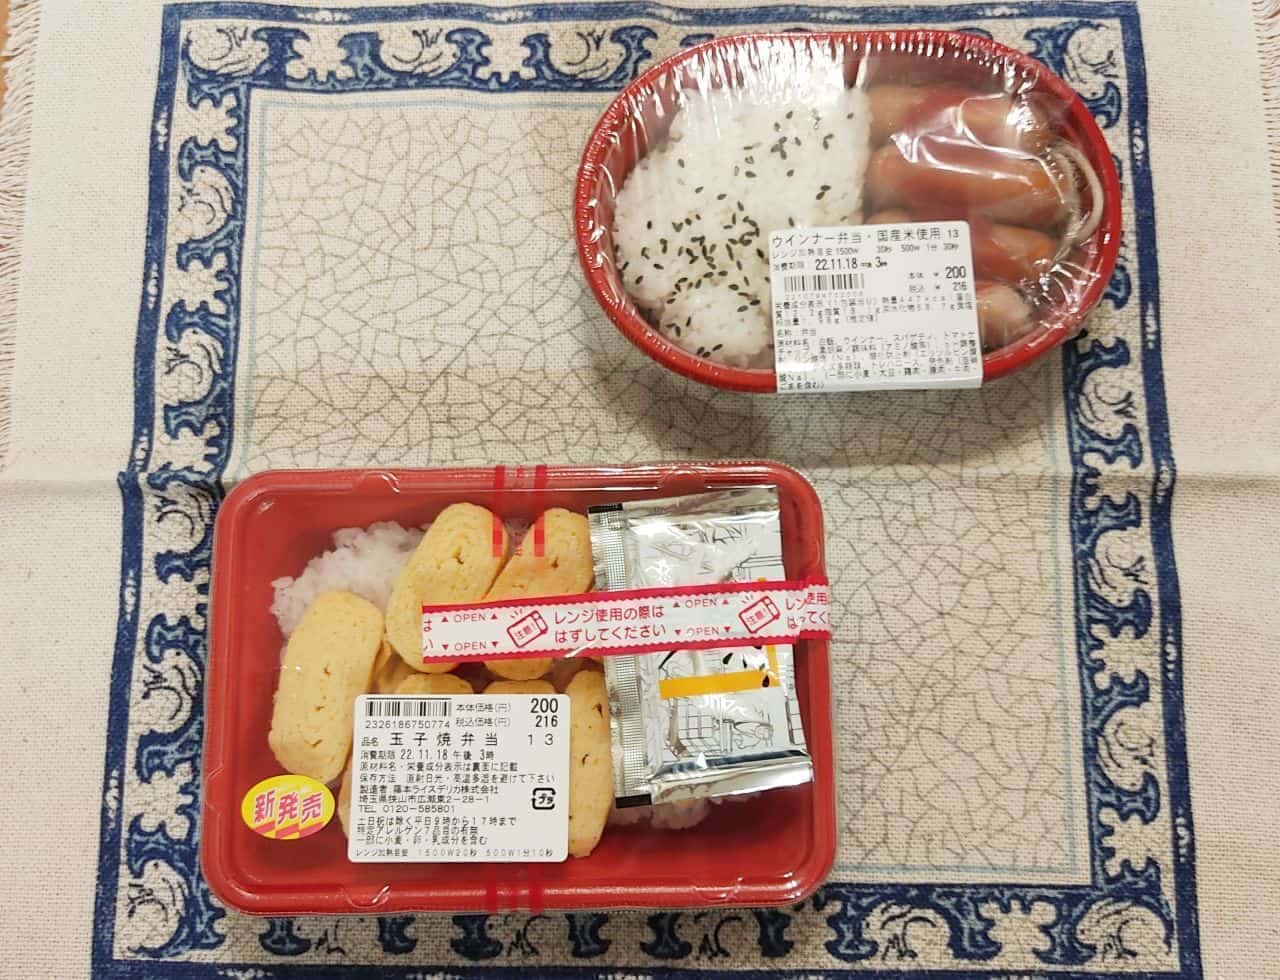  LAWSON STORE100 "Tamago-yaki Bento" with only one side dish.